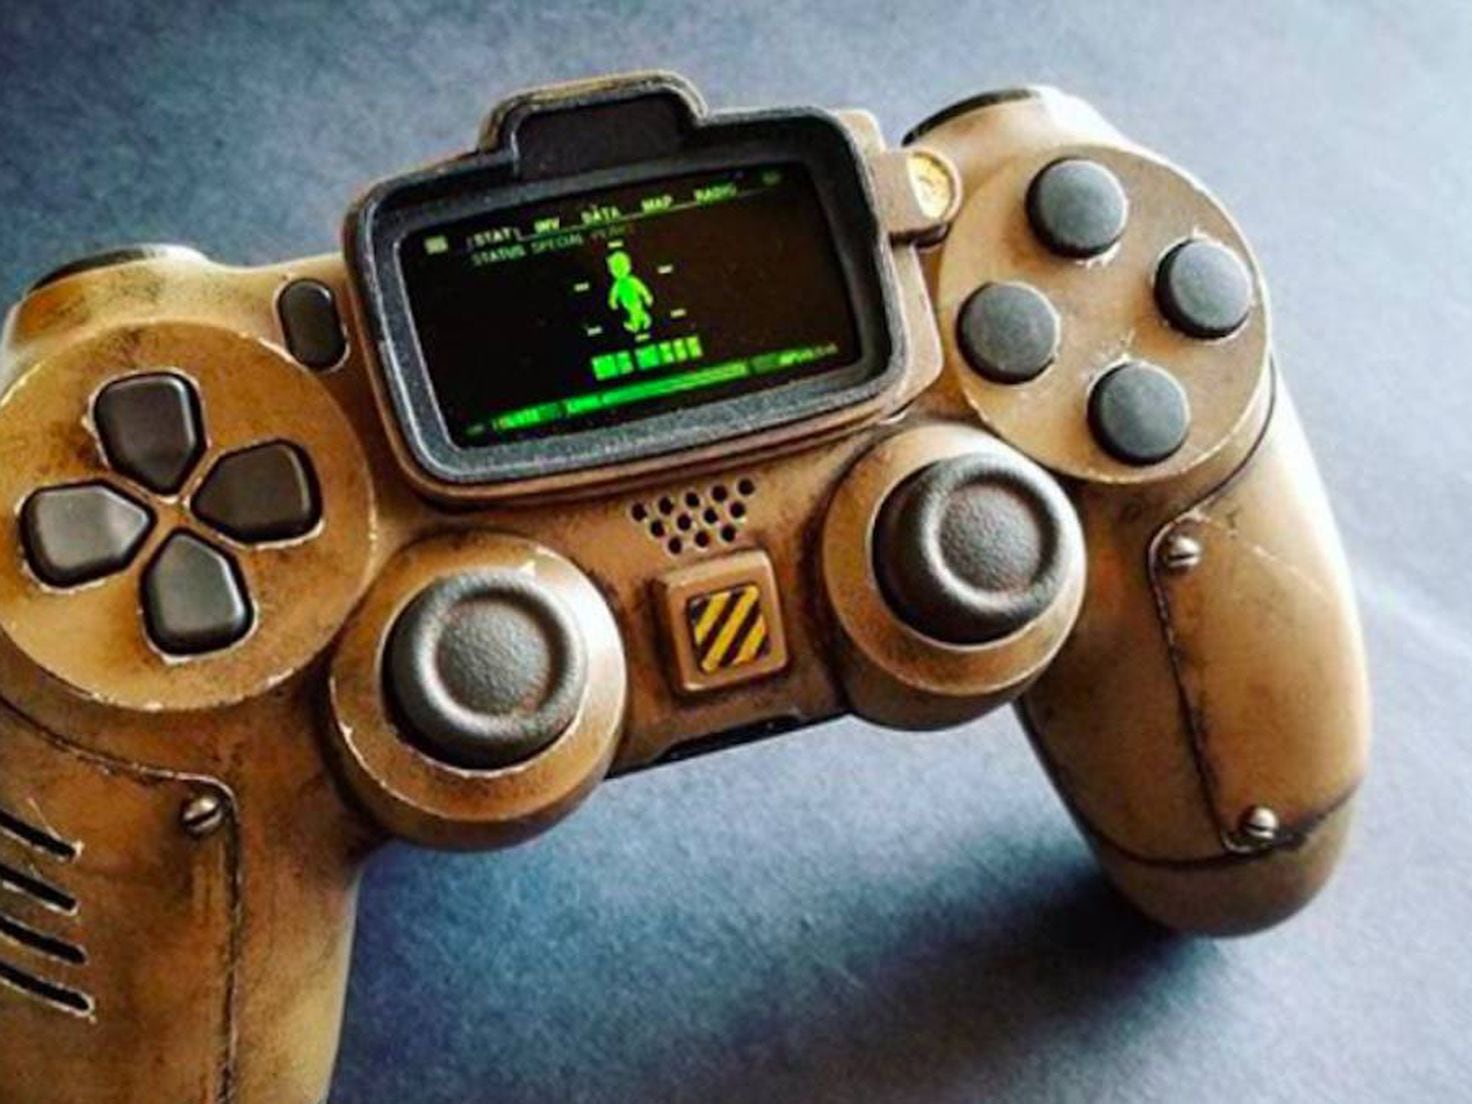 Фоллаут ps4. Фоллаут на ps4. Ps4 кастом фоллаут. Джойстик ПС фоллаут. Геймпад Fallout PS.